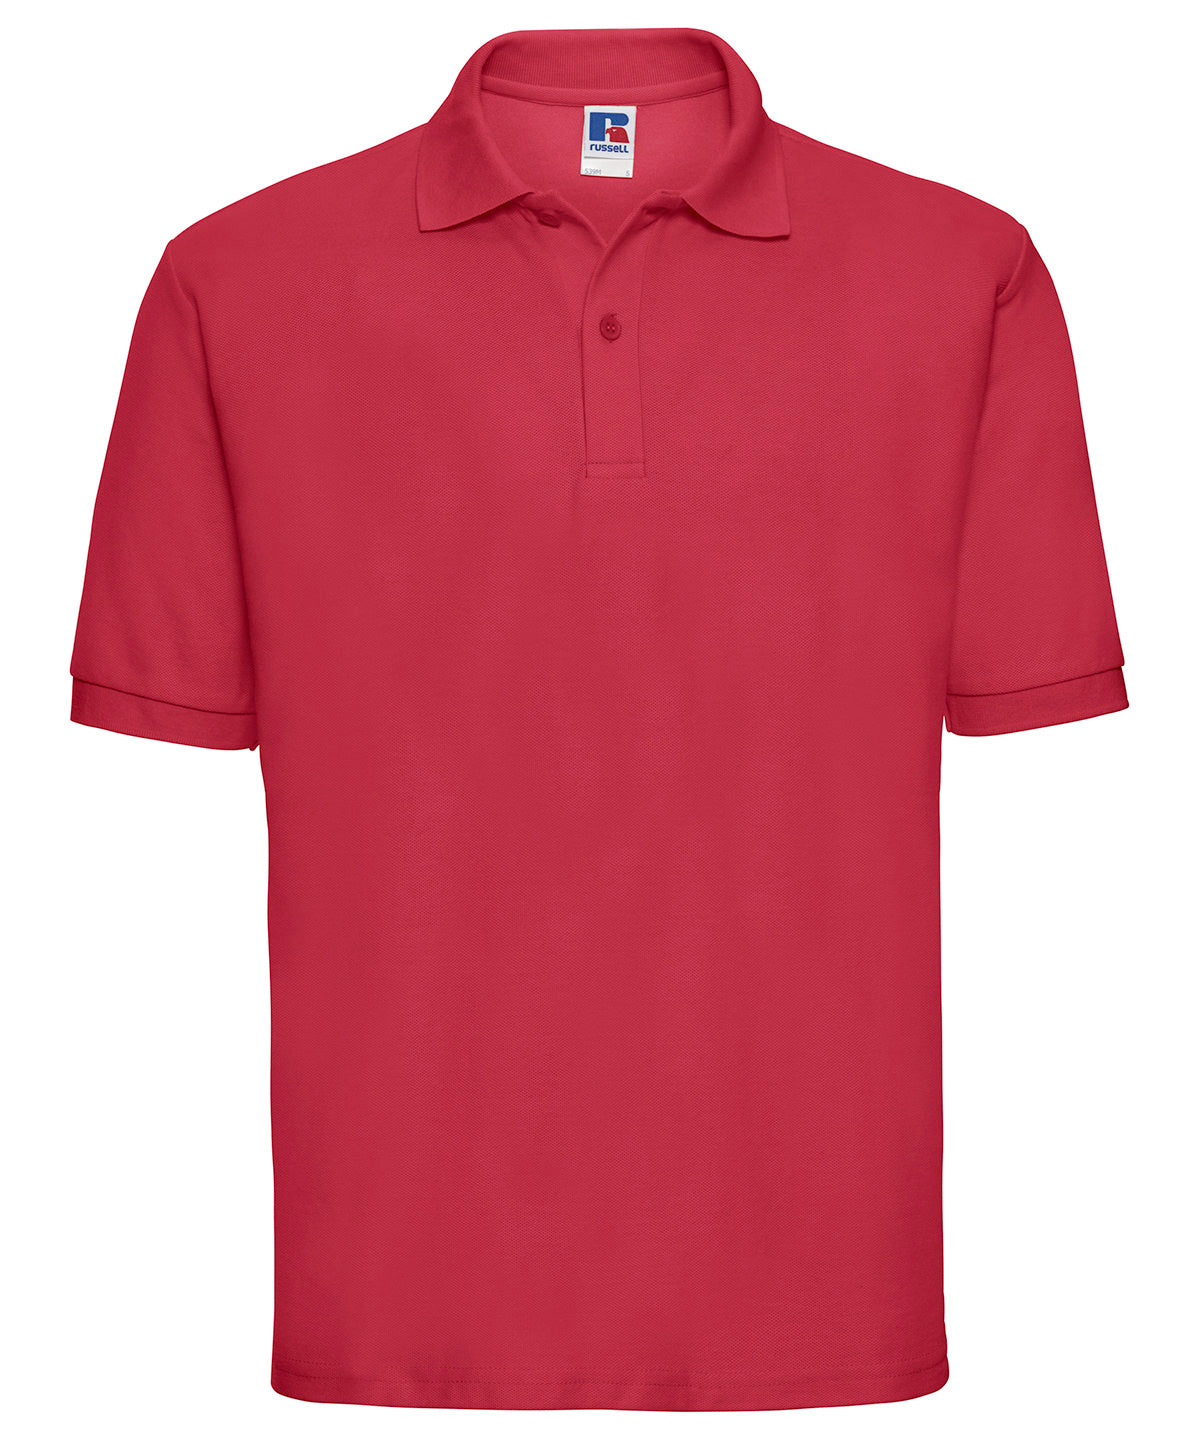 Russell Classic Polycotton Polo Classic Red